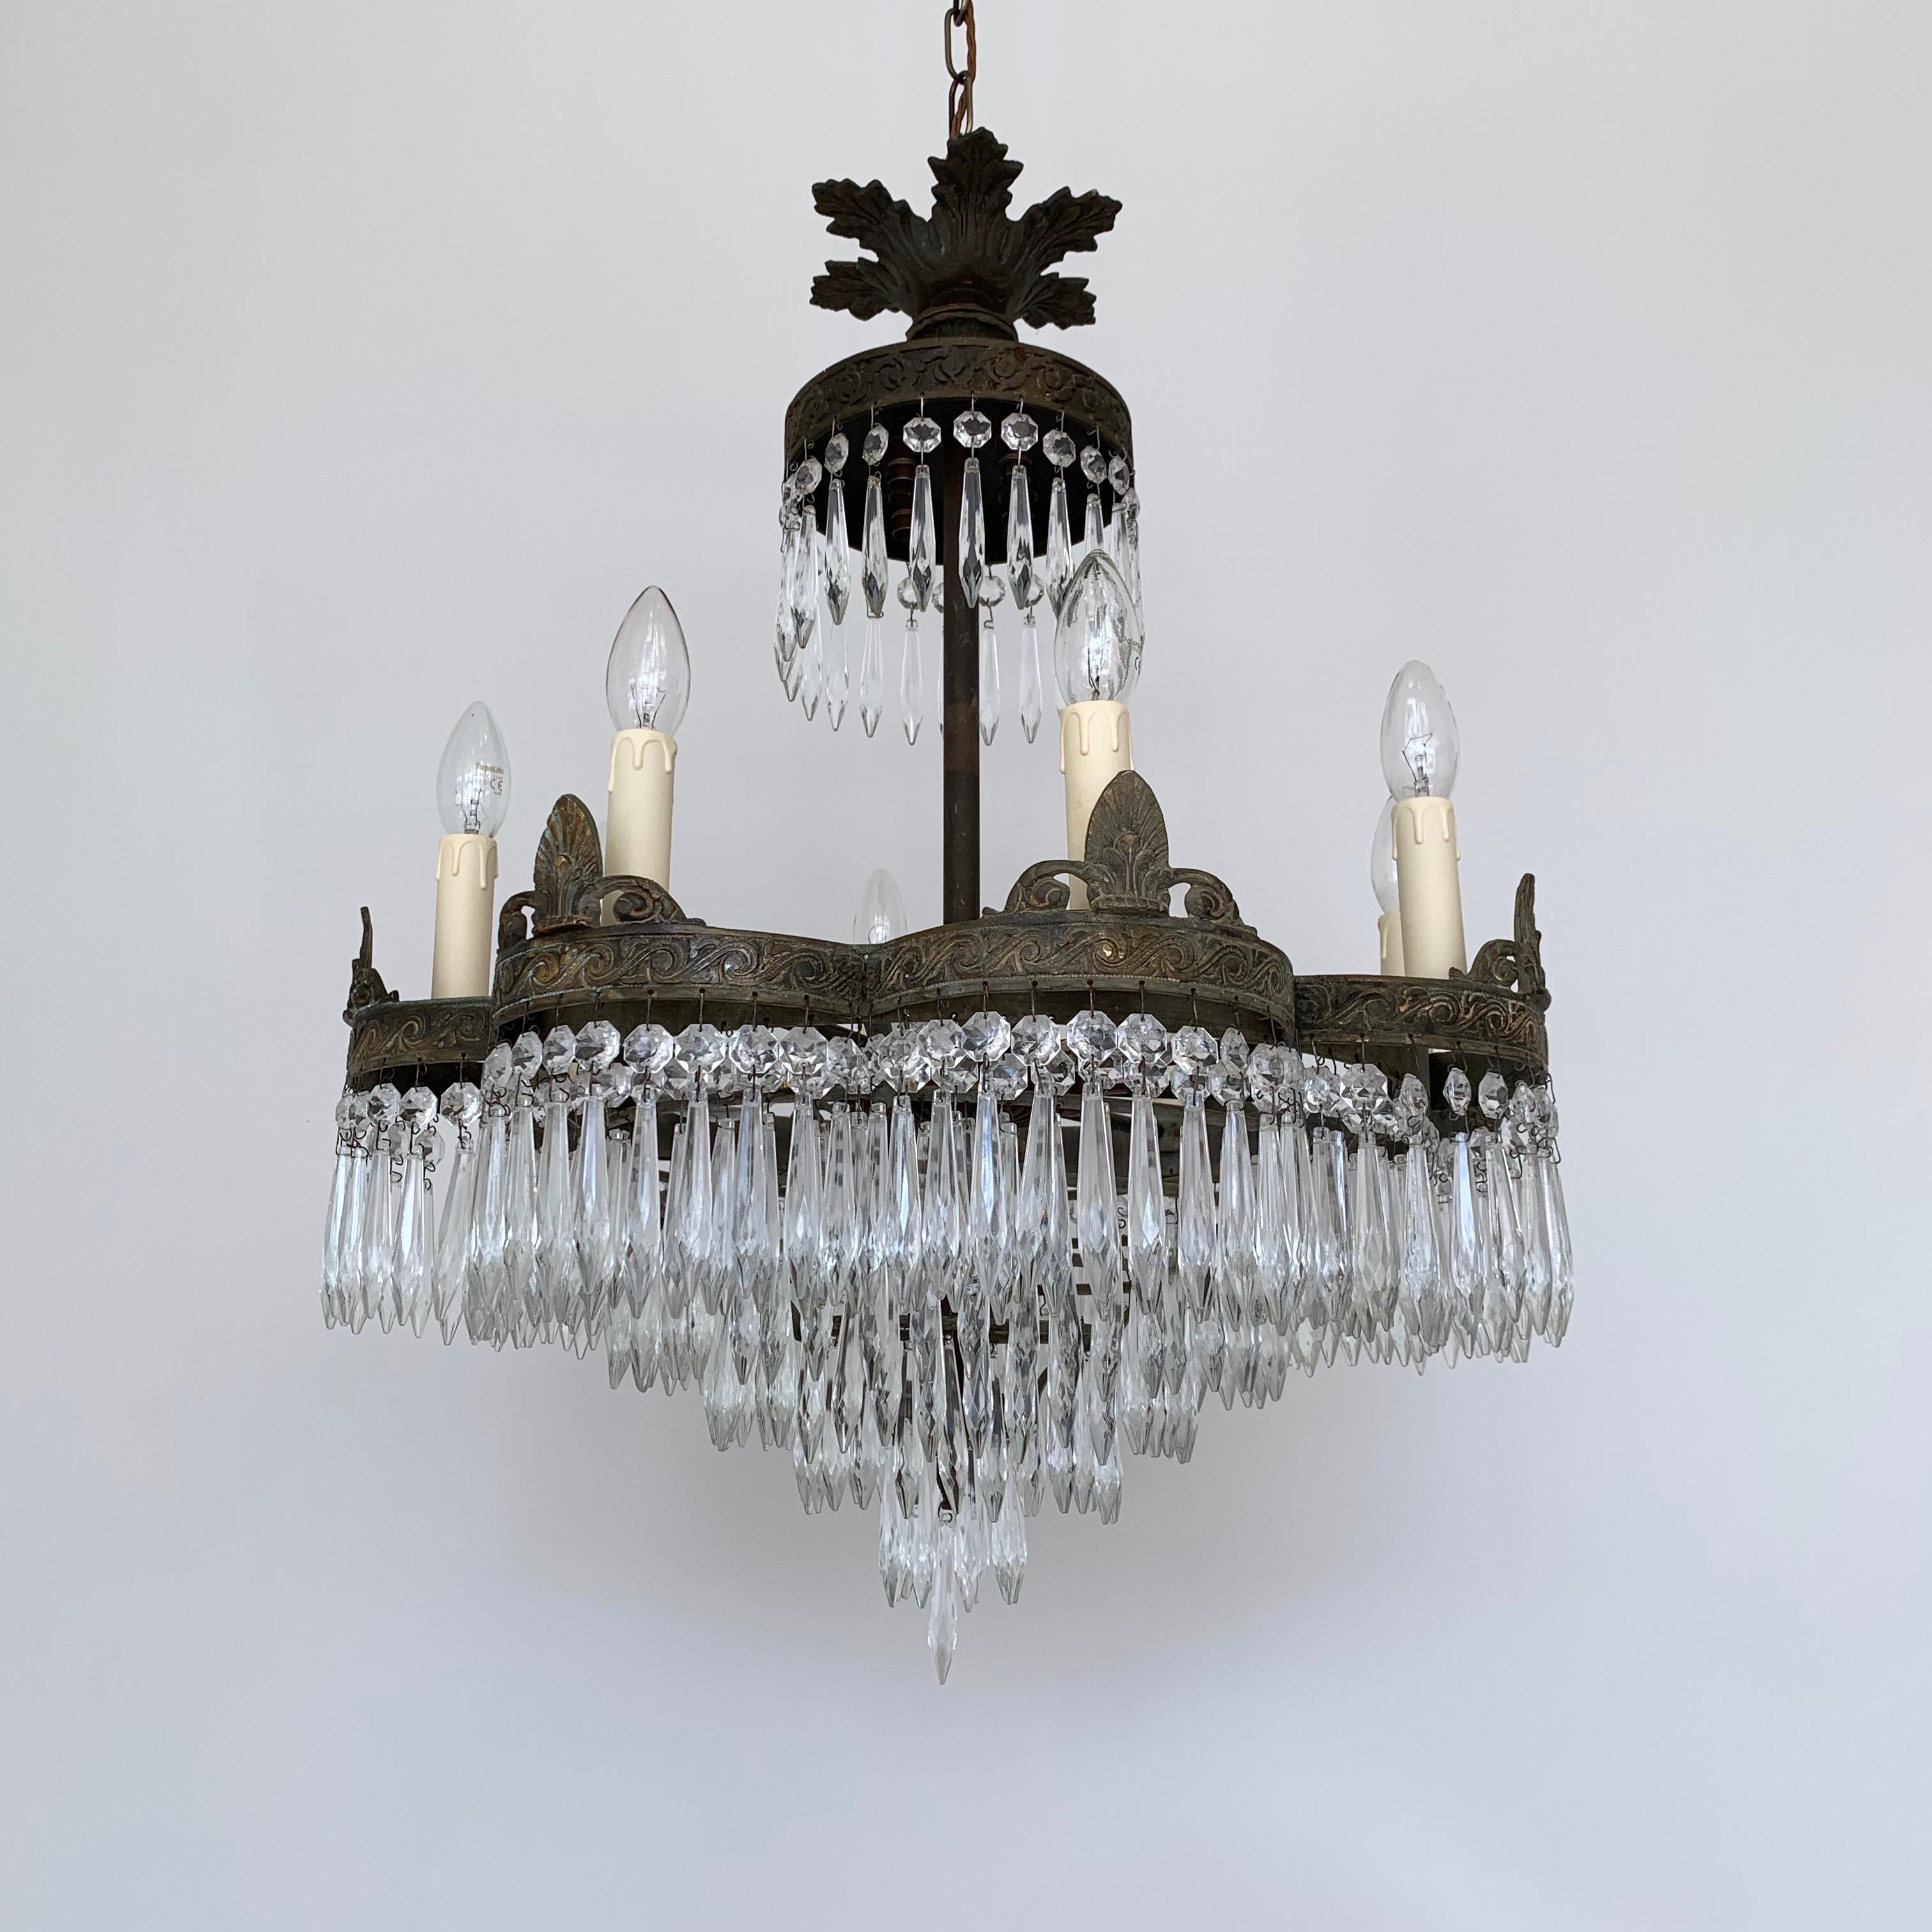 French Waterfall petal frame chandelier with glass icicle drops. 1920s French waterfall chandelier with an outer petal shaped tier. The brass frame has been sympathetically restored retaining the original antiqued brass patina. The chandelier is